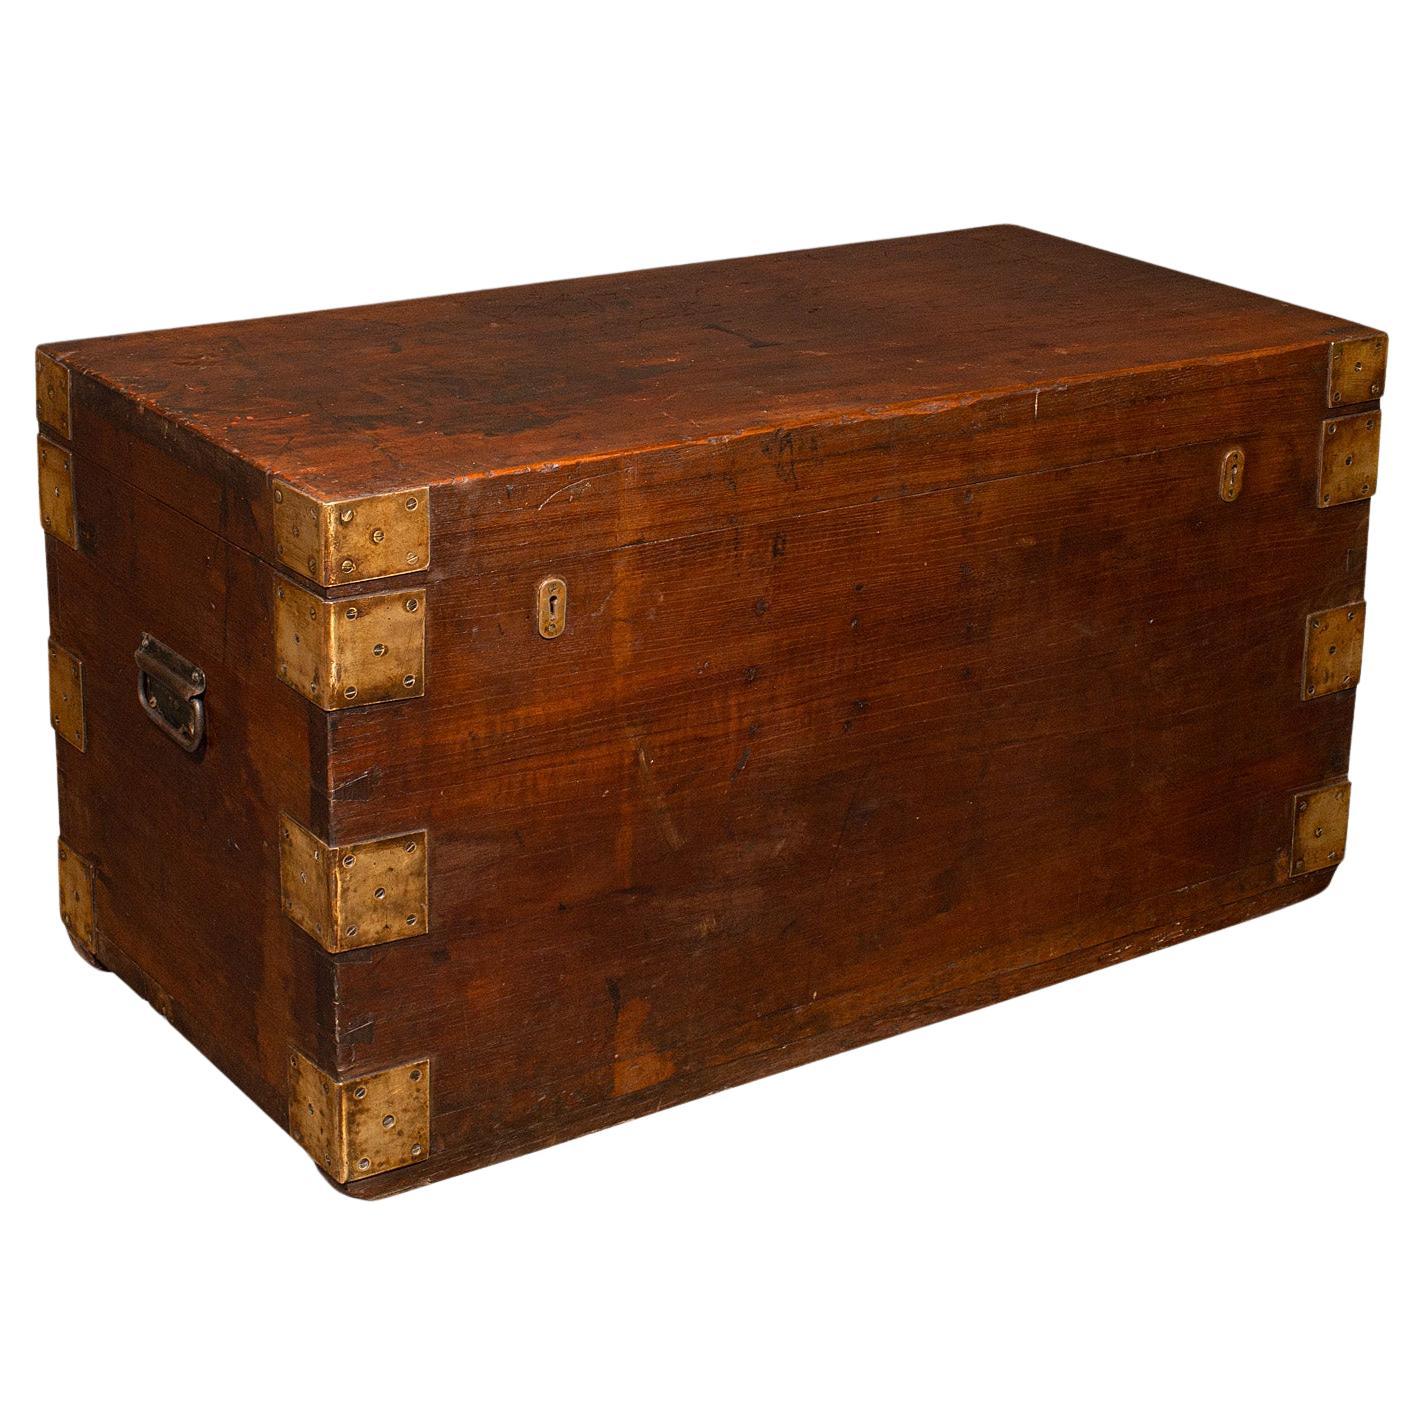 Vintage Campaign Silver Chest, English, Teak, Brass, Shipping Trunk, Art Deco For Sale